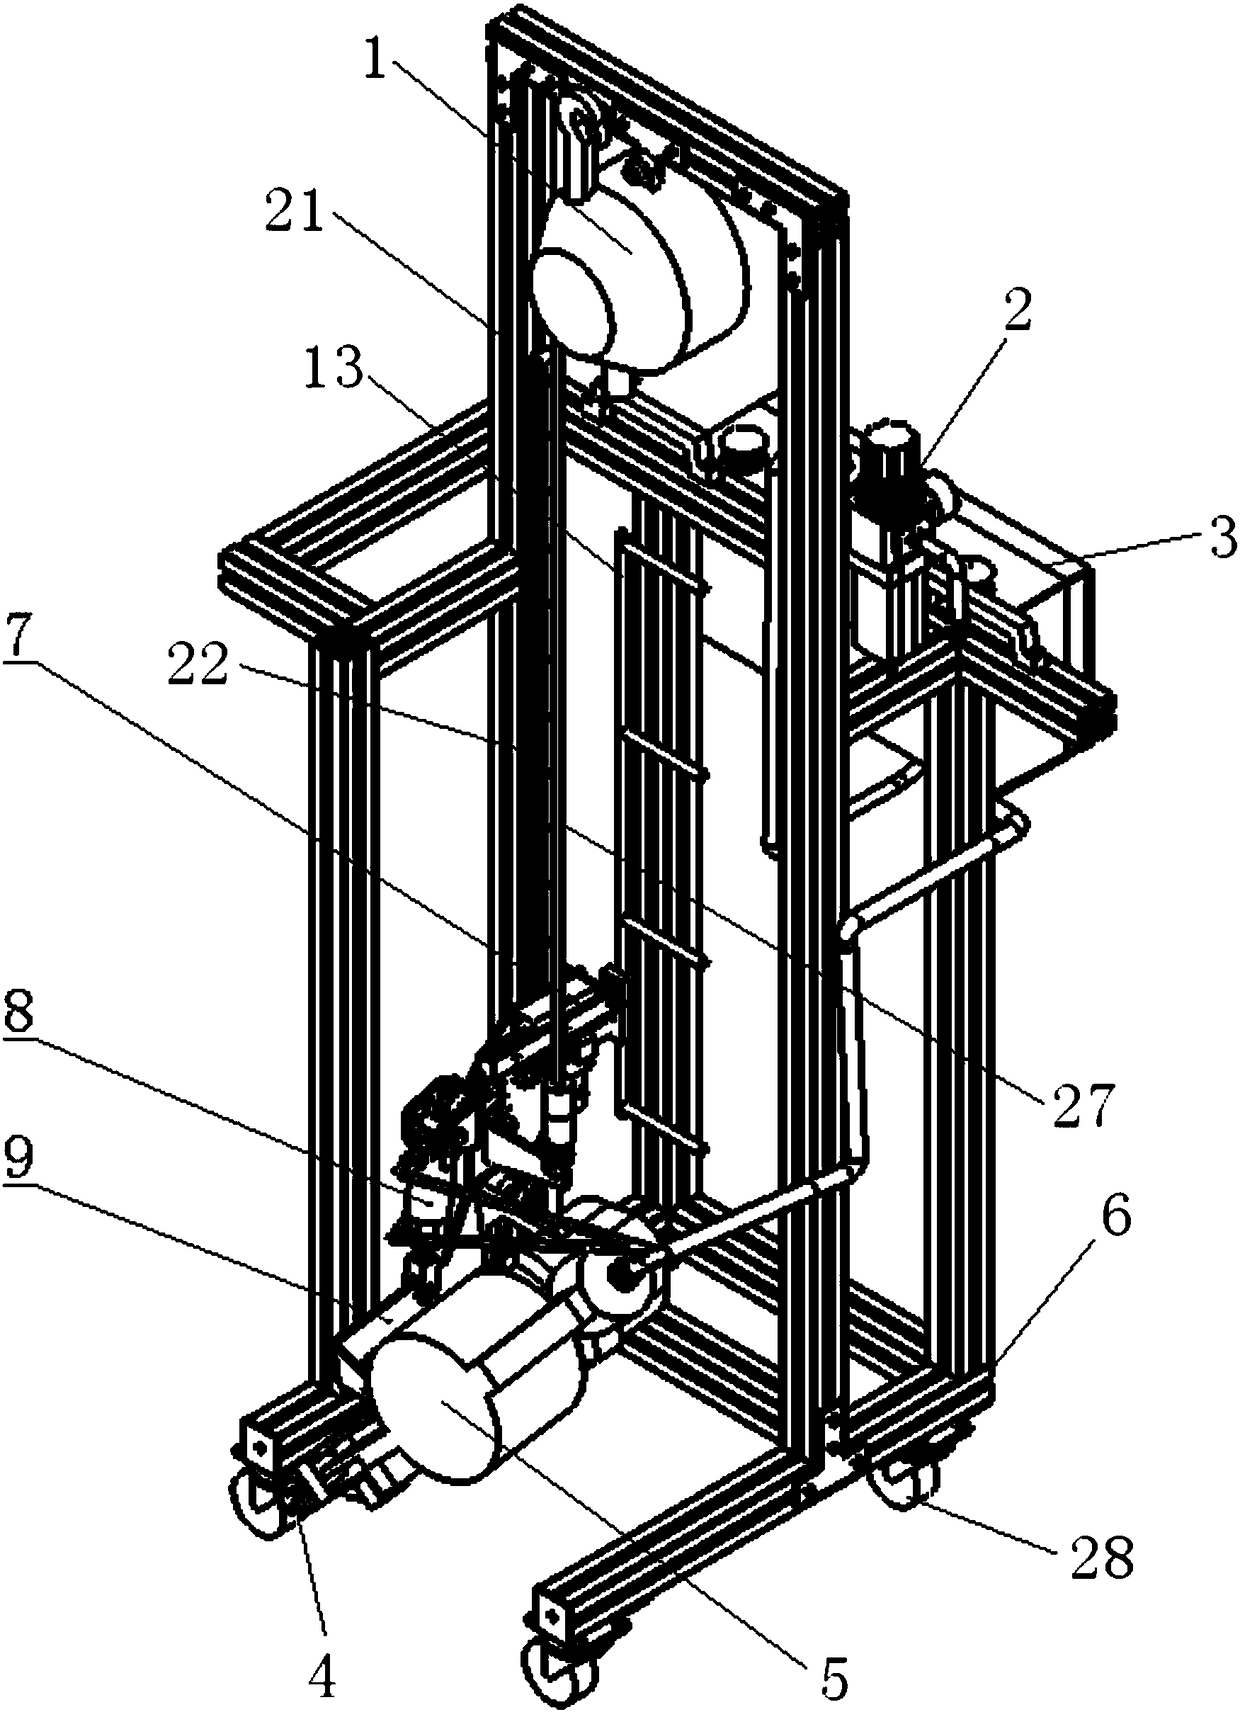 Semi-automatic operating mechanism of air coil nailer